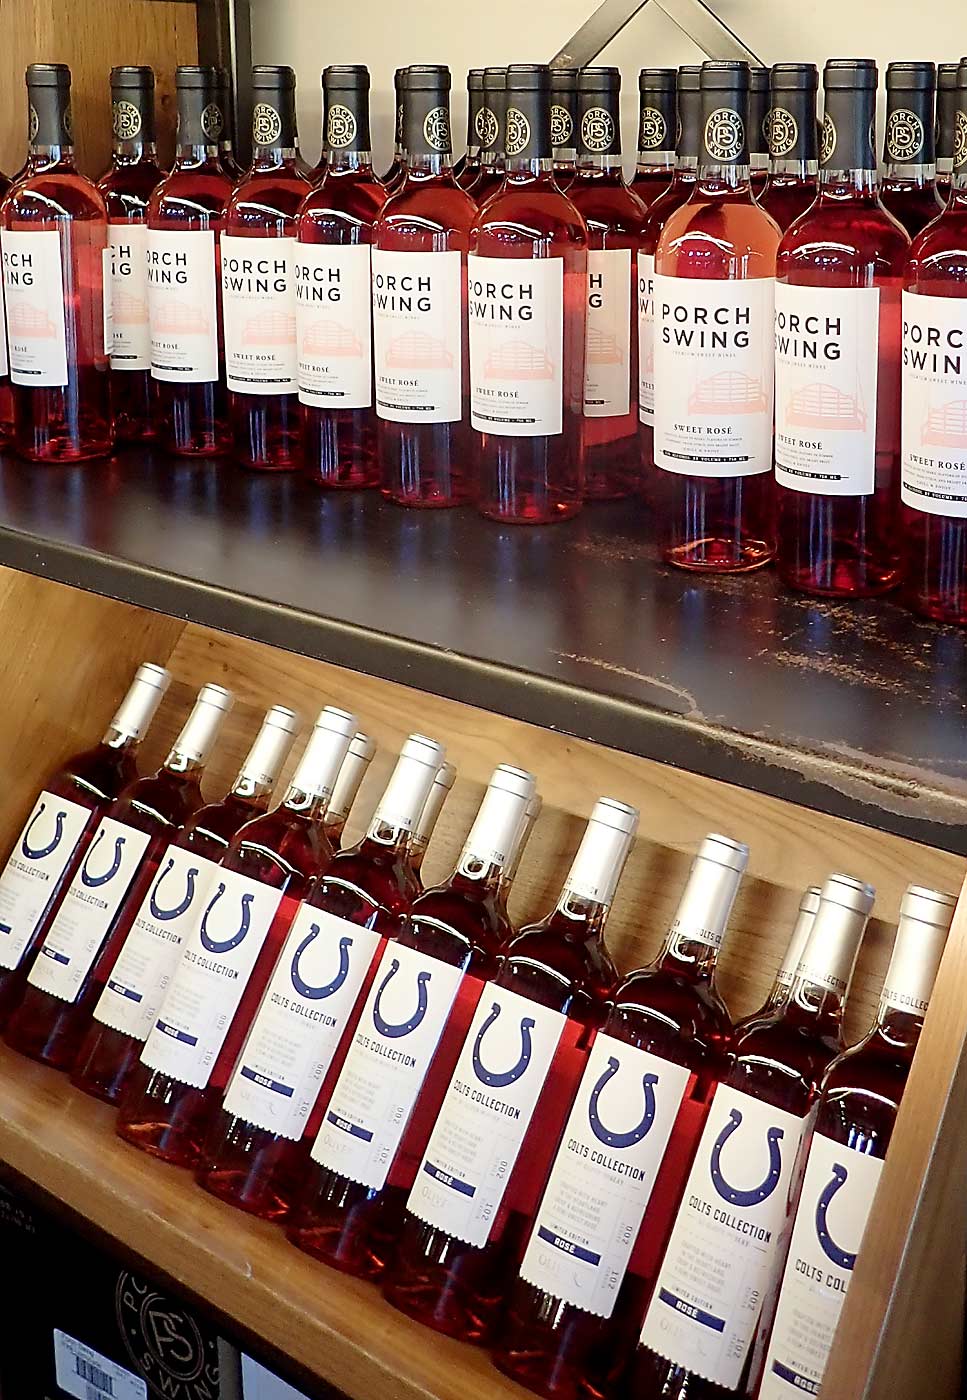 Oliver Winery produces dozens of wines, including eight estate wines, and a lineup of classic dry reds, semisweets and sweets. It is noted for its Colts Collection, “the official wine” of the Indianapolis Colts football team. (Leslie Mertz/for Good Fruit Grower)